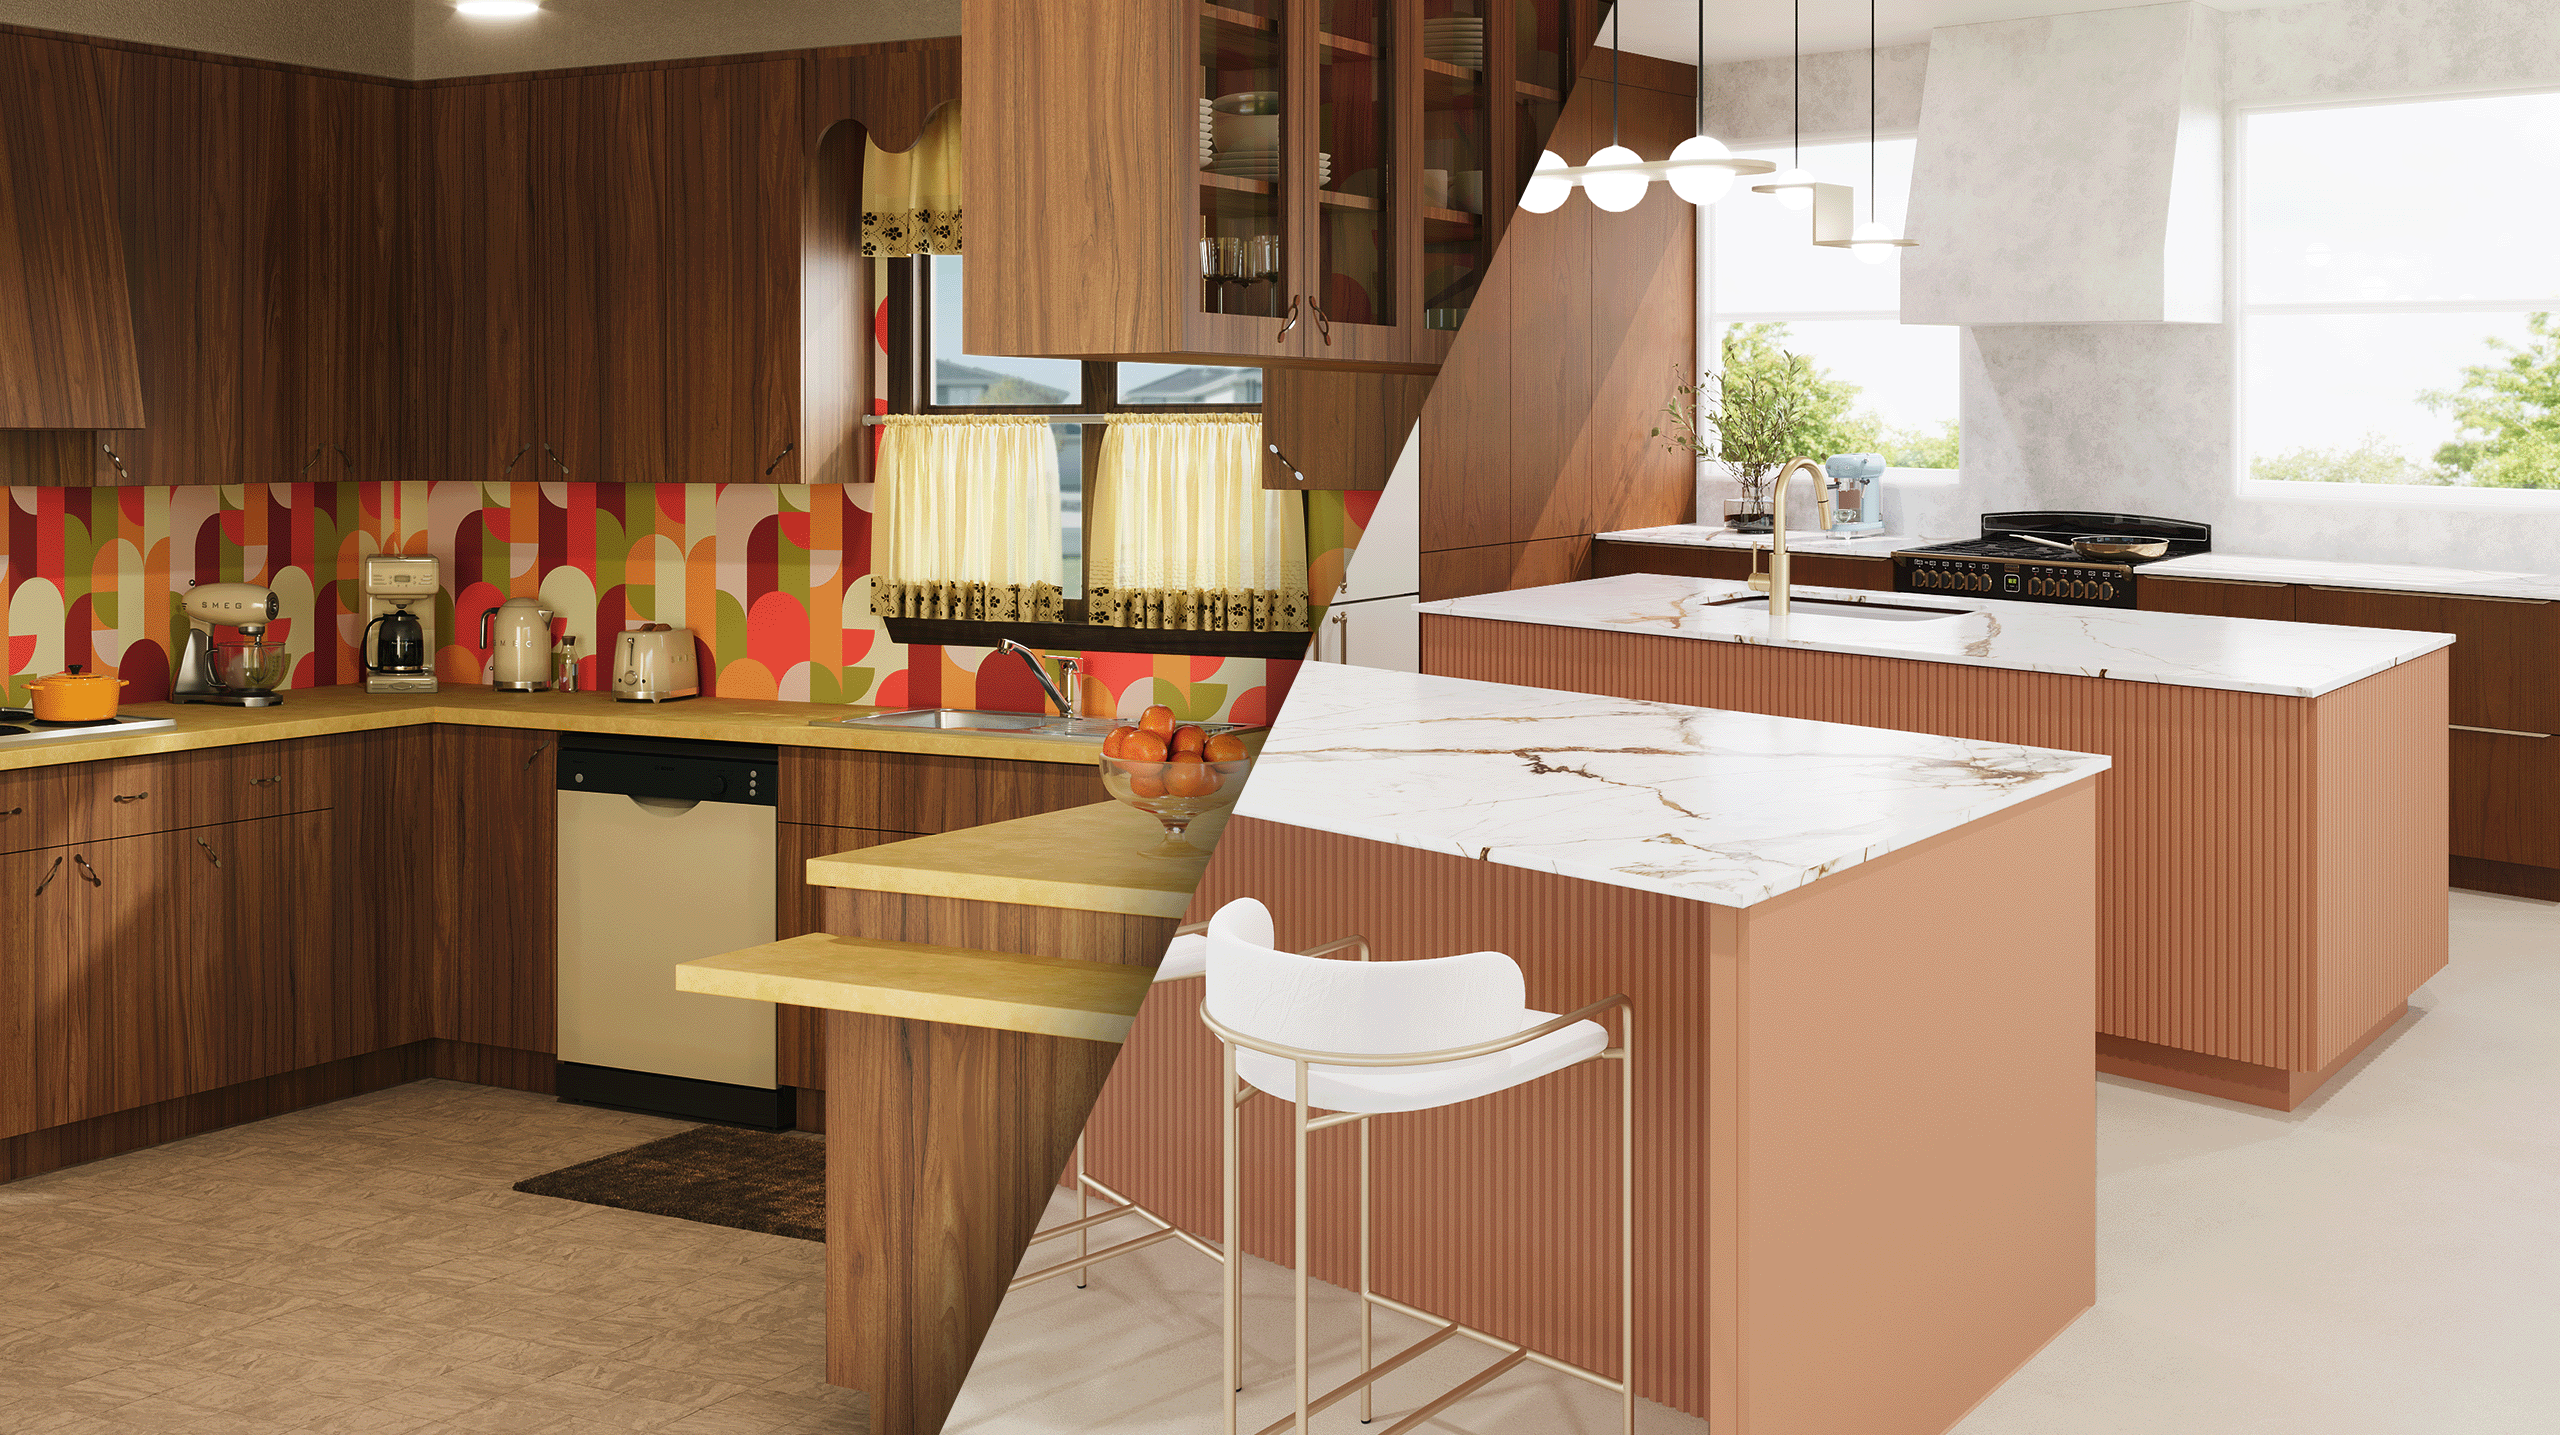 Kitchen of the 70s and kitchen of the future